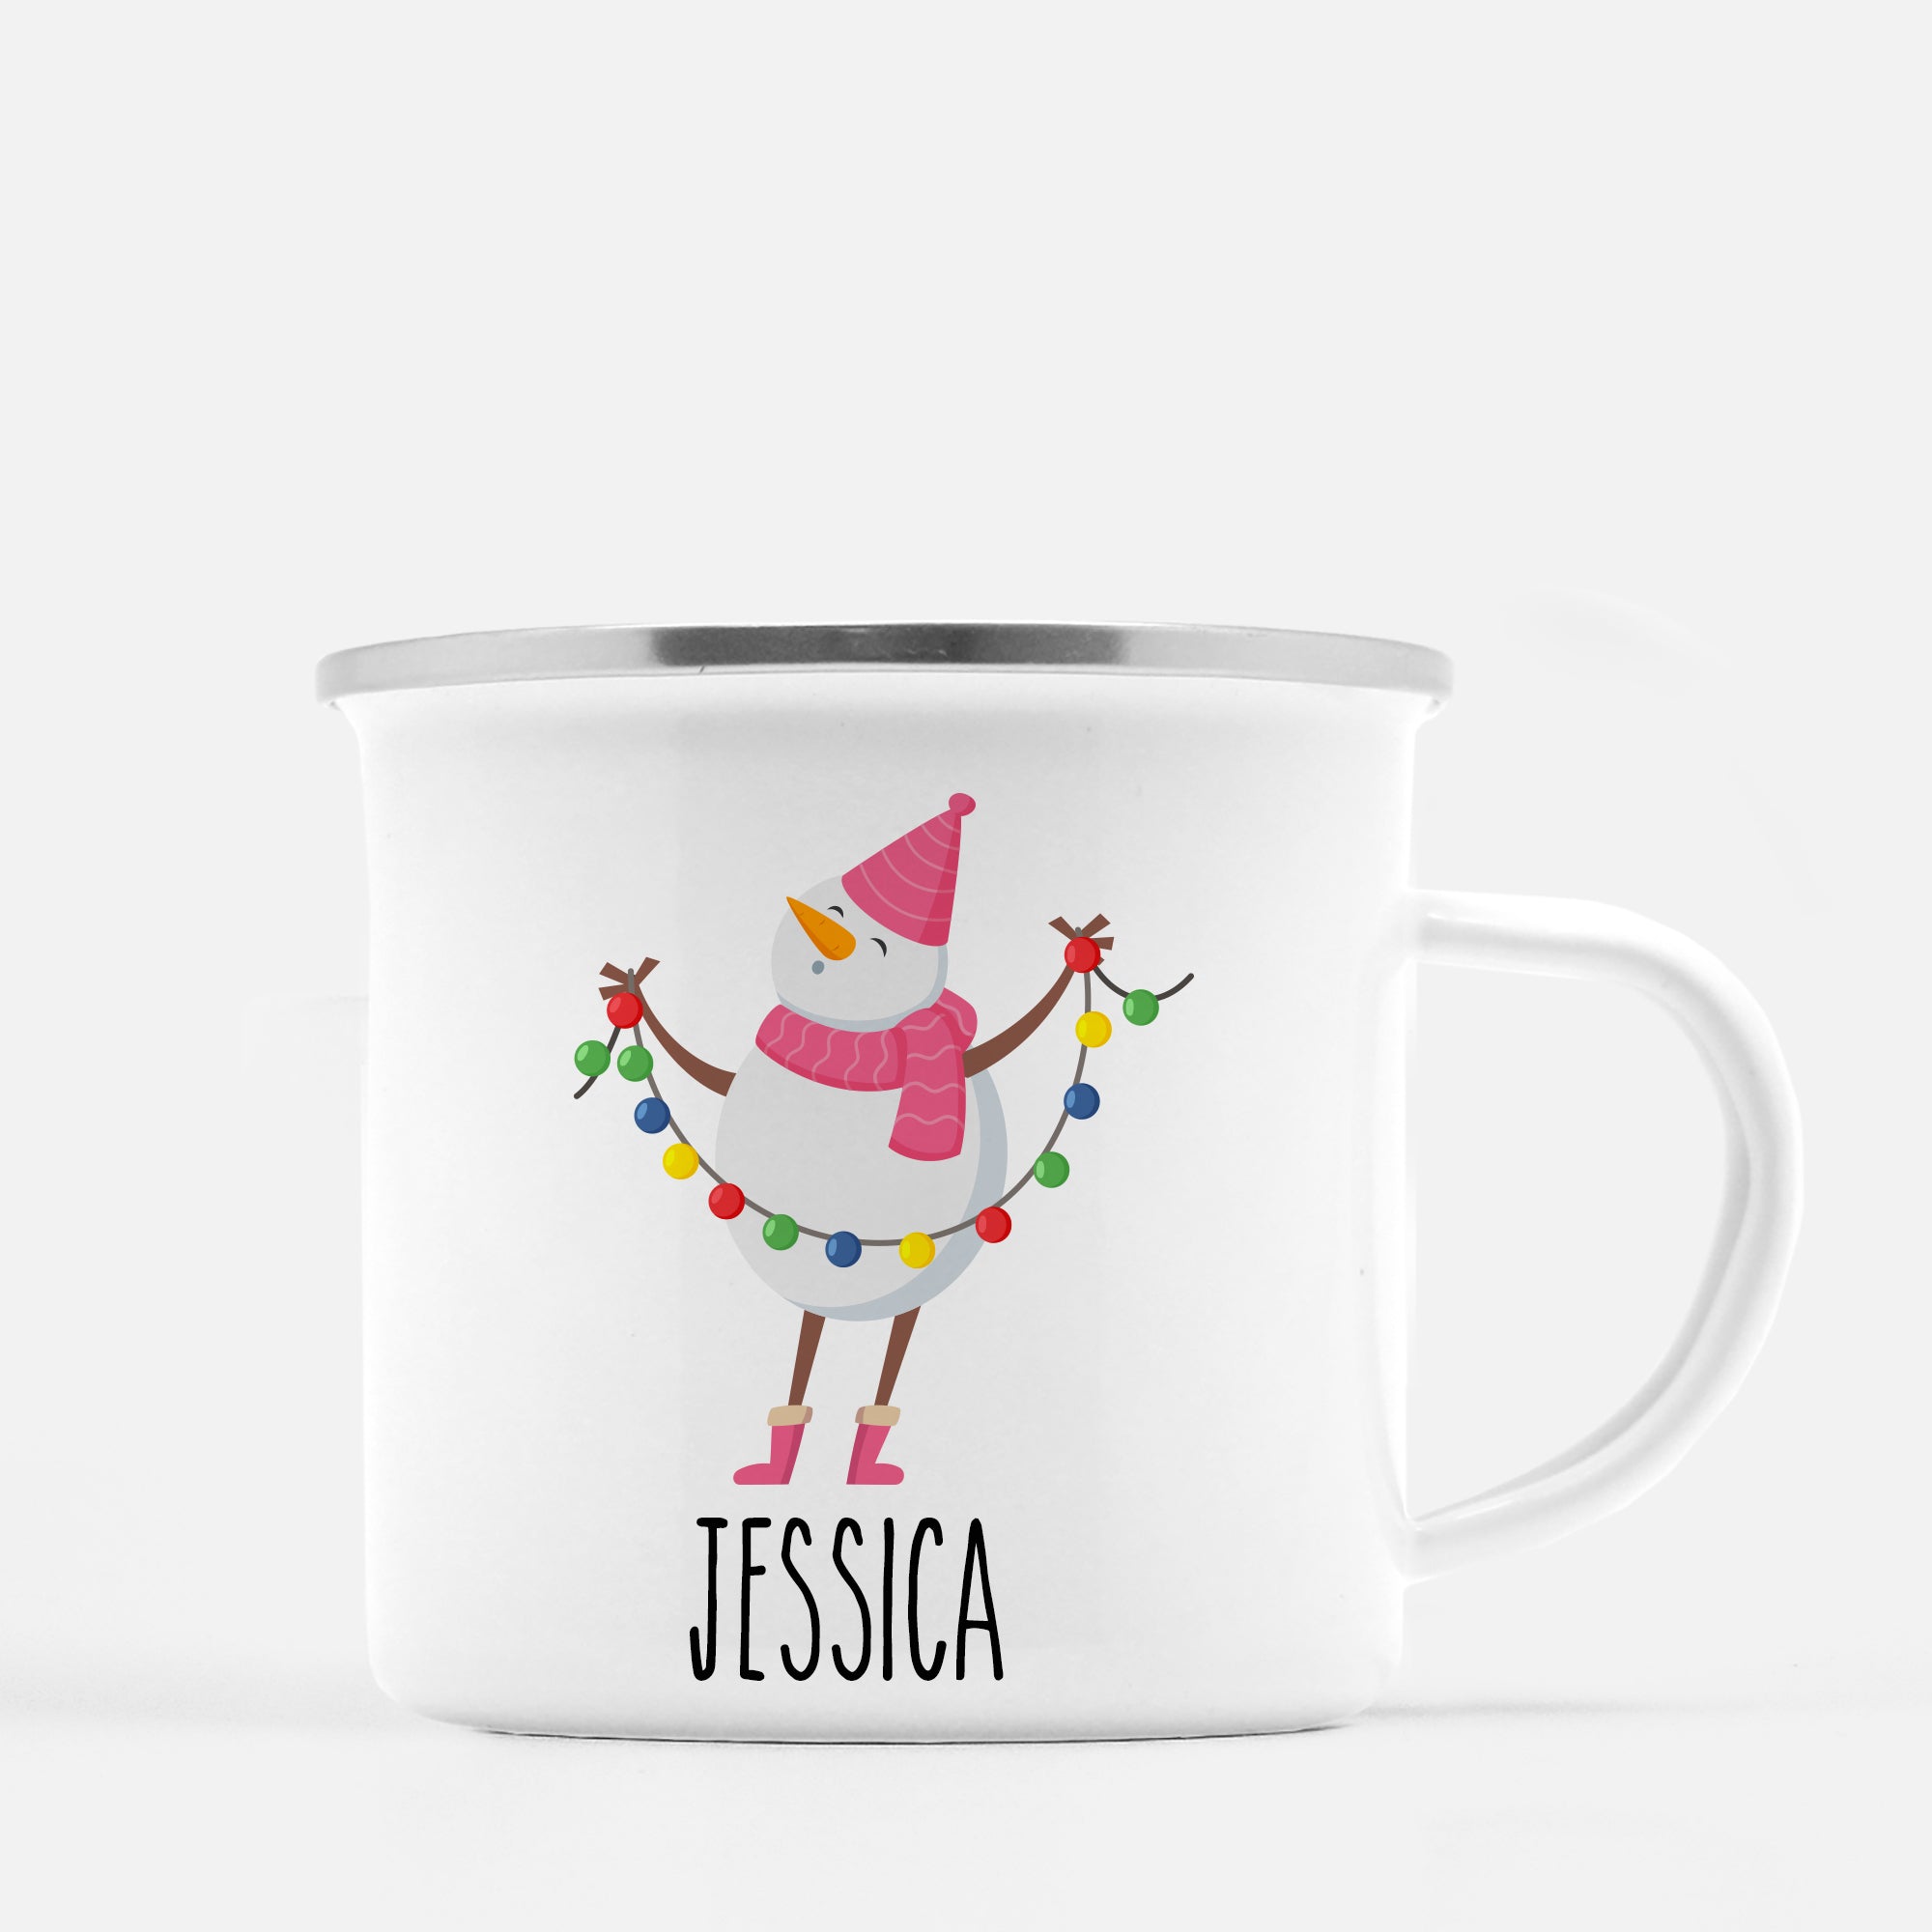 Christmas Camp Mug, Snowman with holiday  lights, Personalized, Red Lip